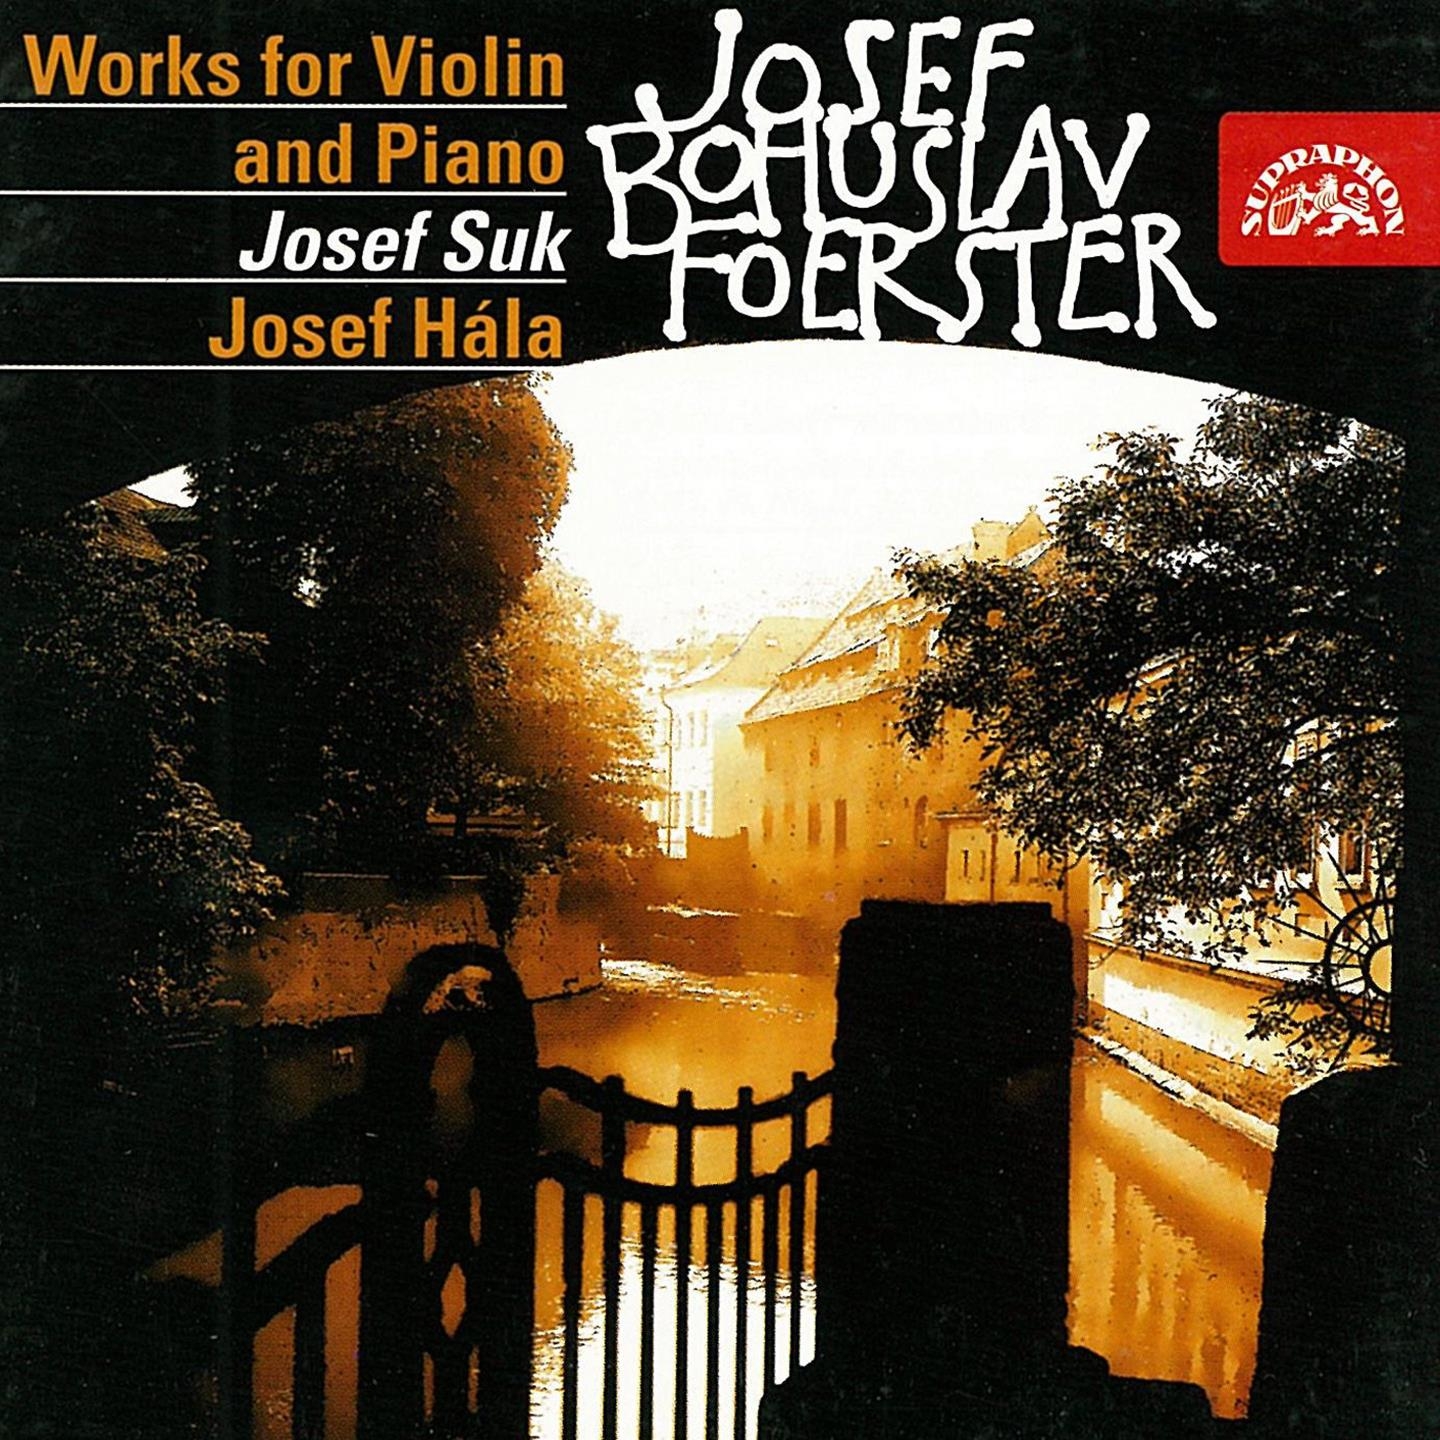 Foerster: Works for Violin and Piano I & II